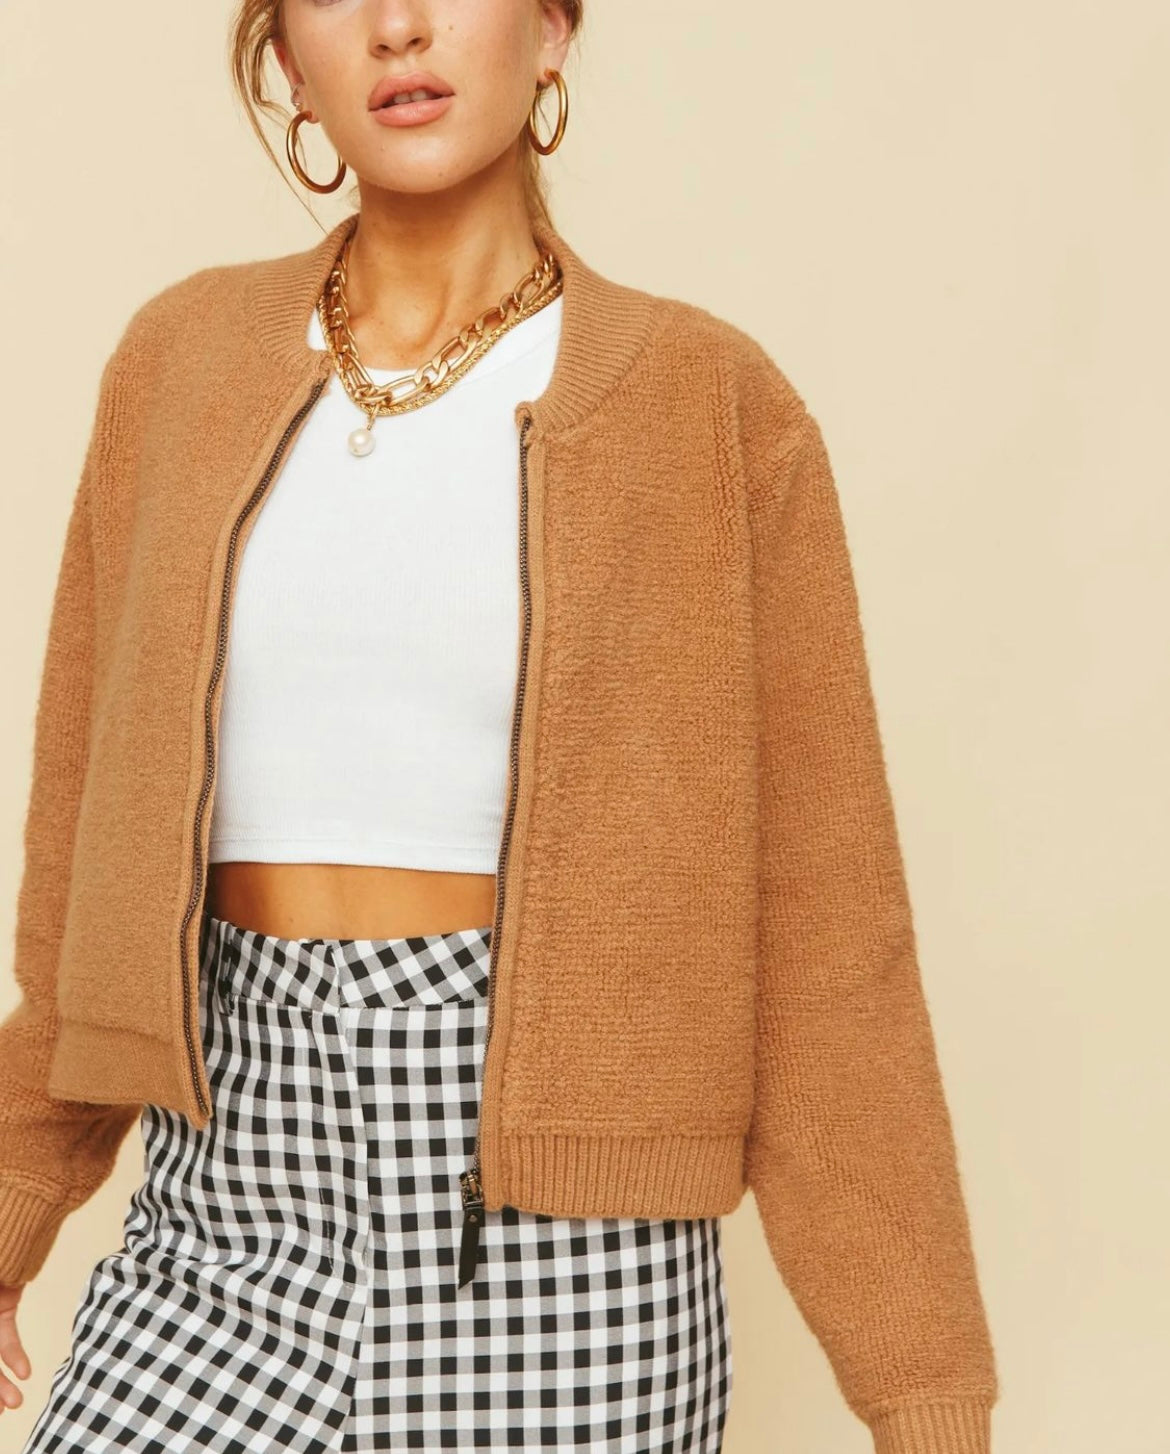 All About May Bomber Jacket - Tan